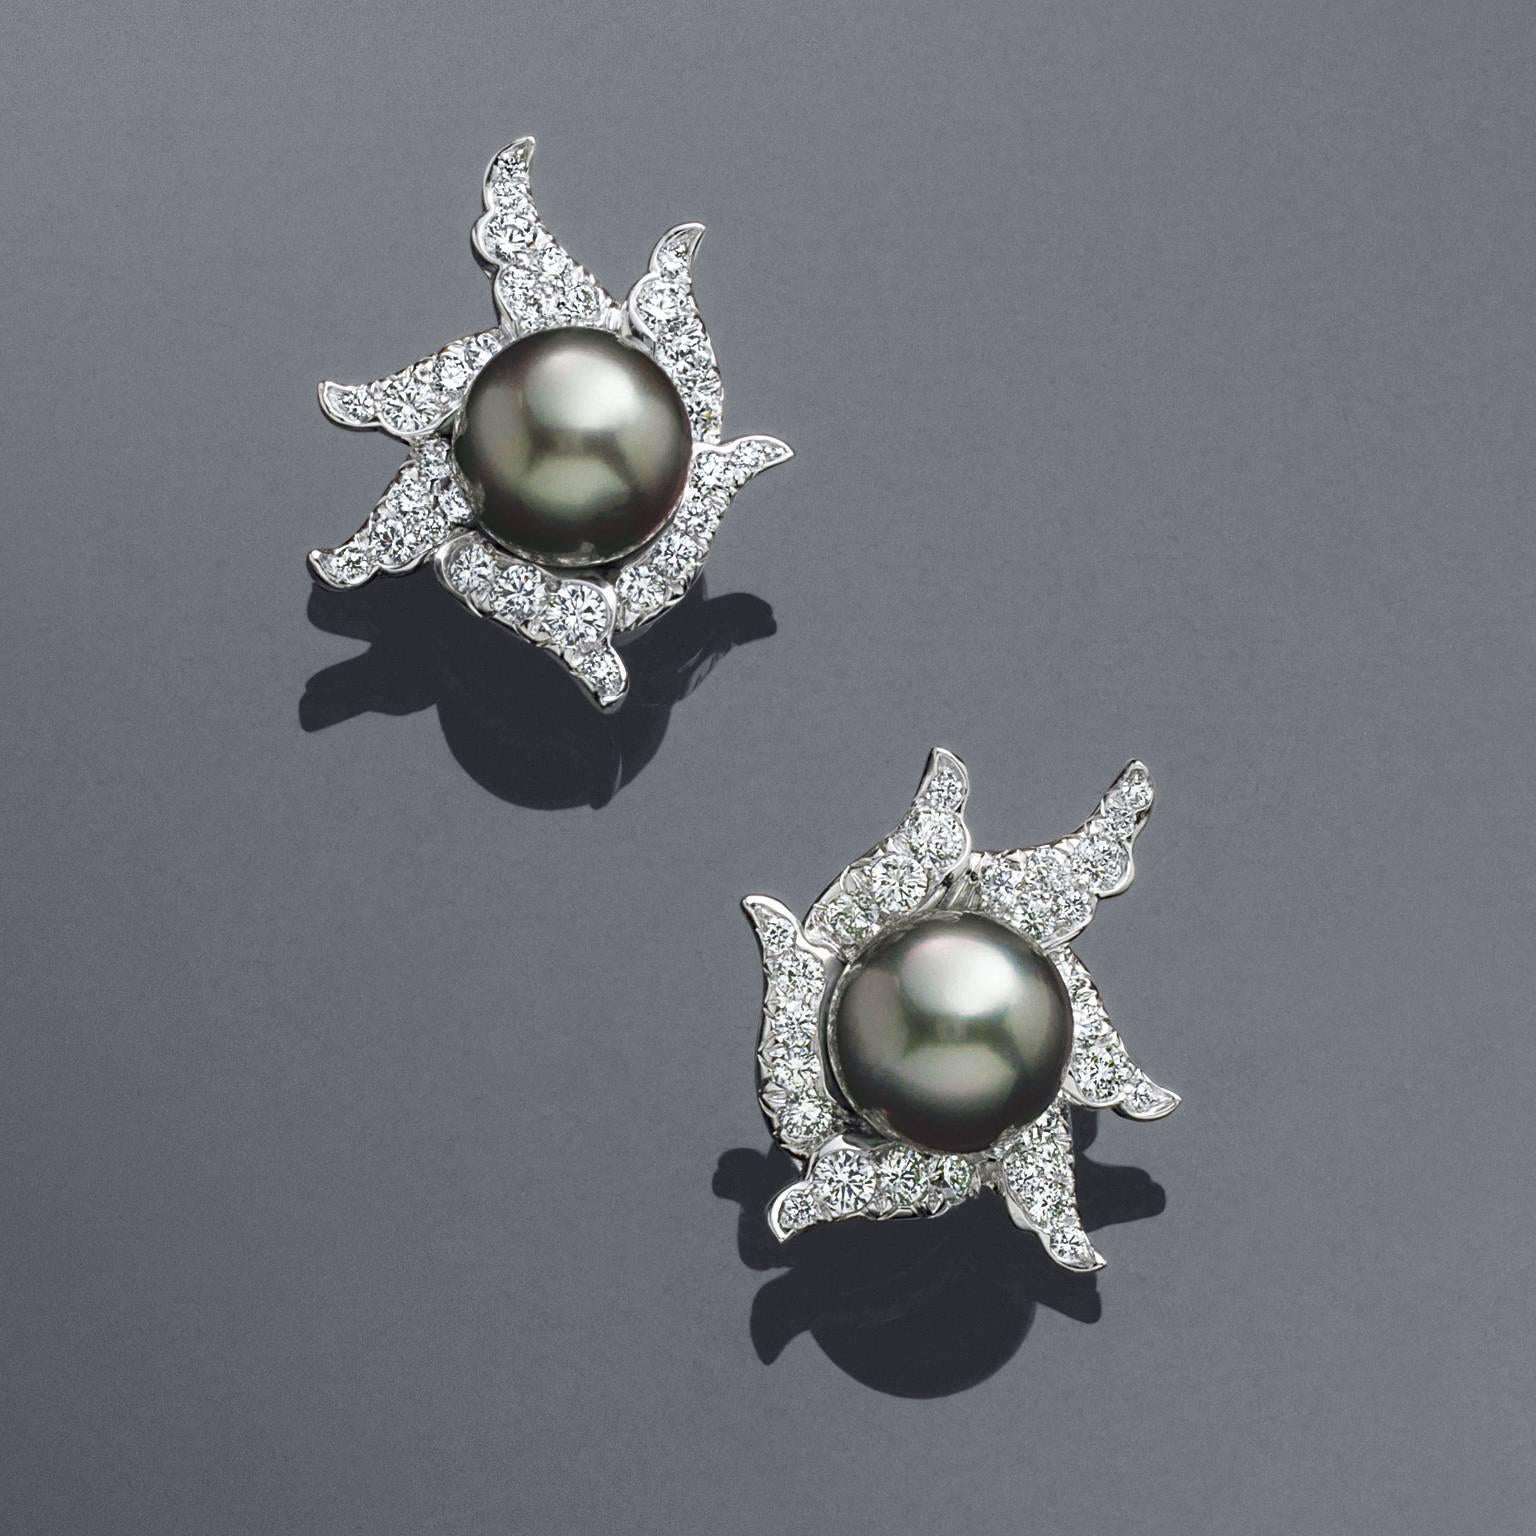 Dark, dramatic Tahitian Cultured Pearls are set in white-capped waves of diamonds in these statement button earrings. Earrings are platinum and 18K white gold. Designed by Angela Cummings for Assael of New York. 

Pair of Gem Quality 11.9 mm